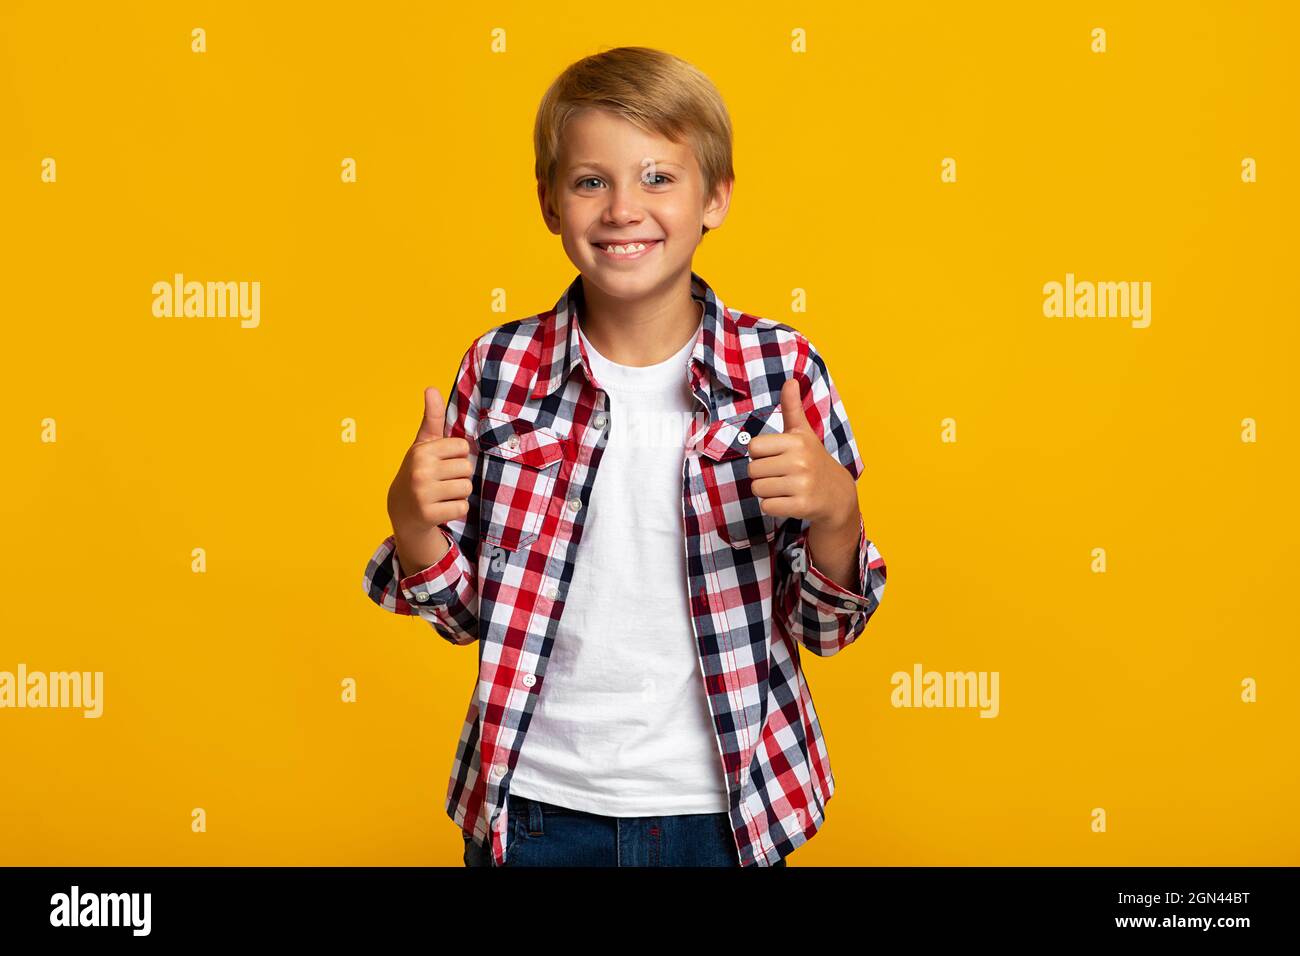 Cheerful young teen boy student show thumbs up sign recommends something for school Stock Photo